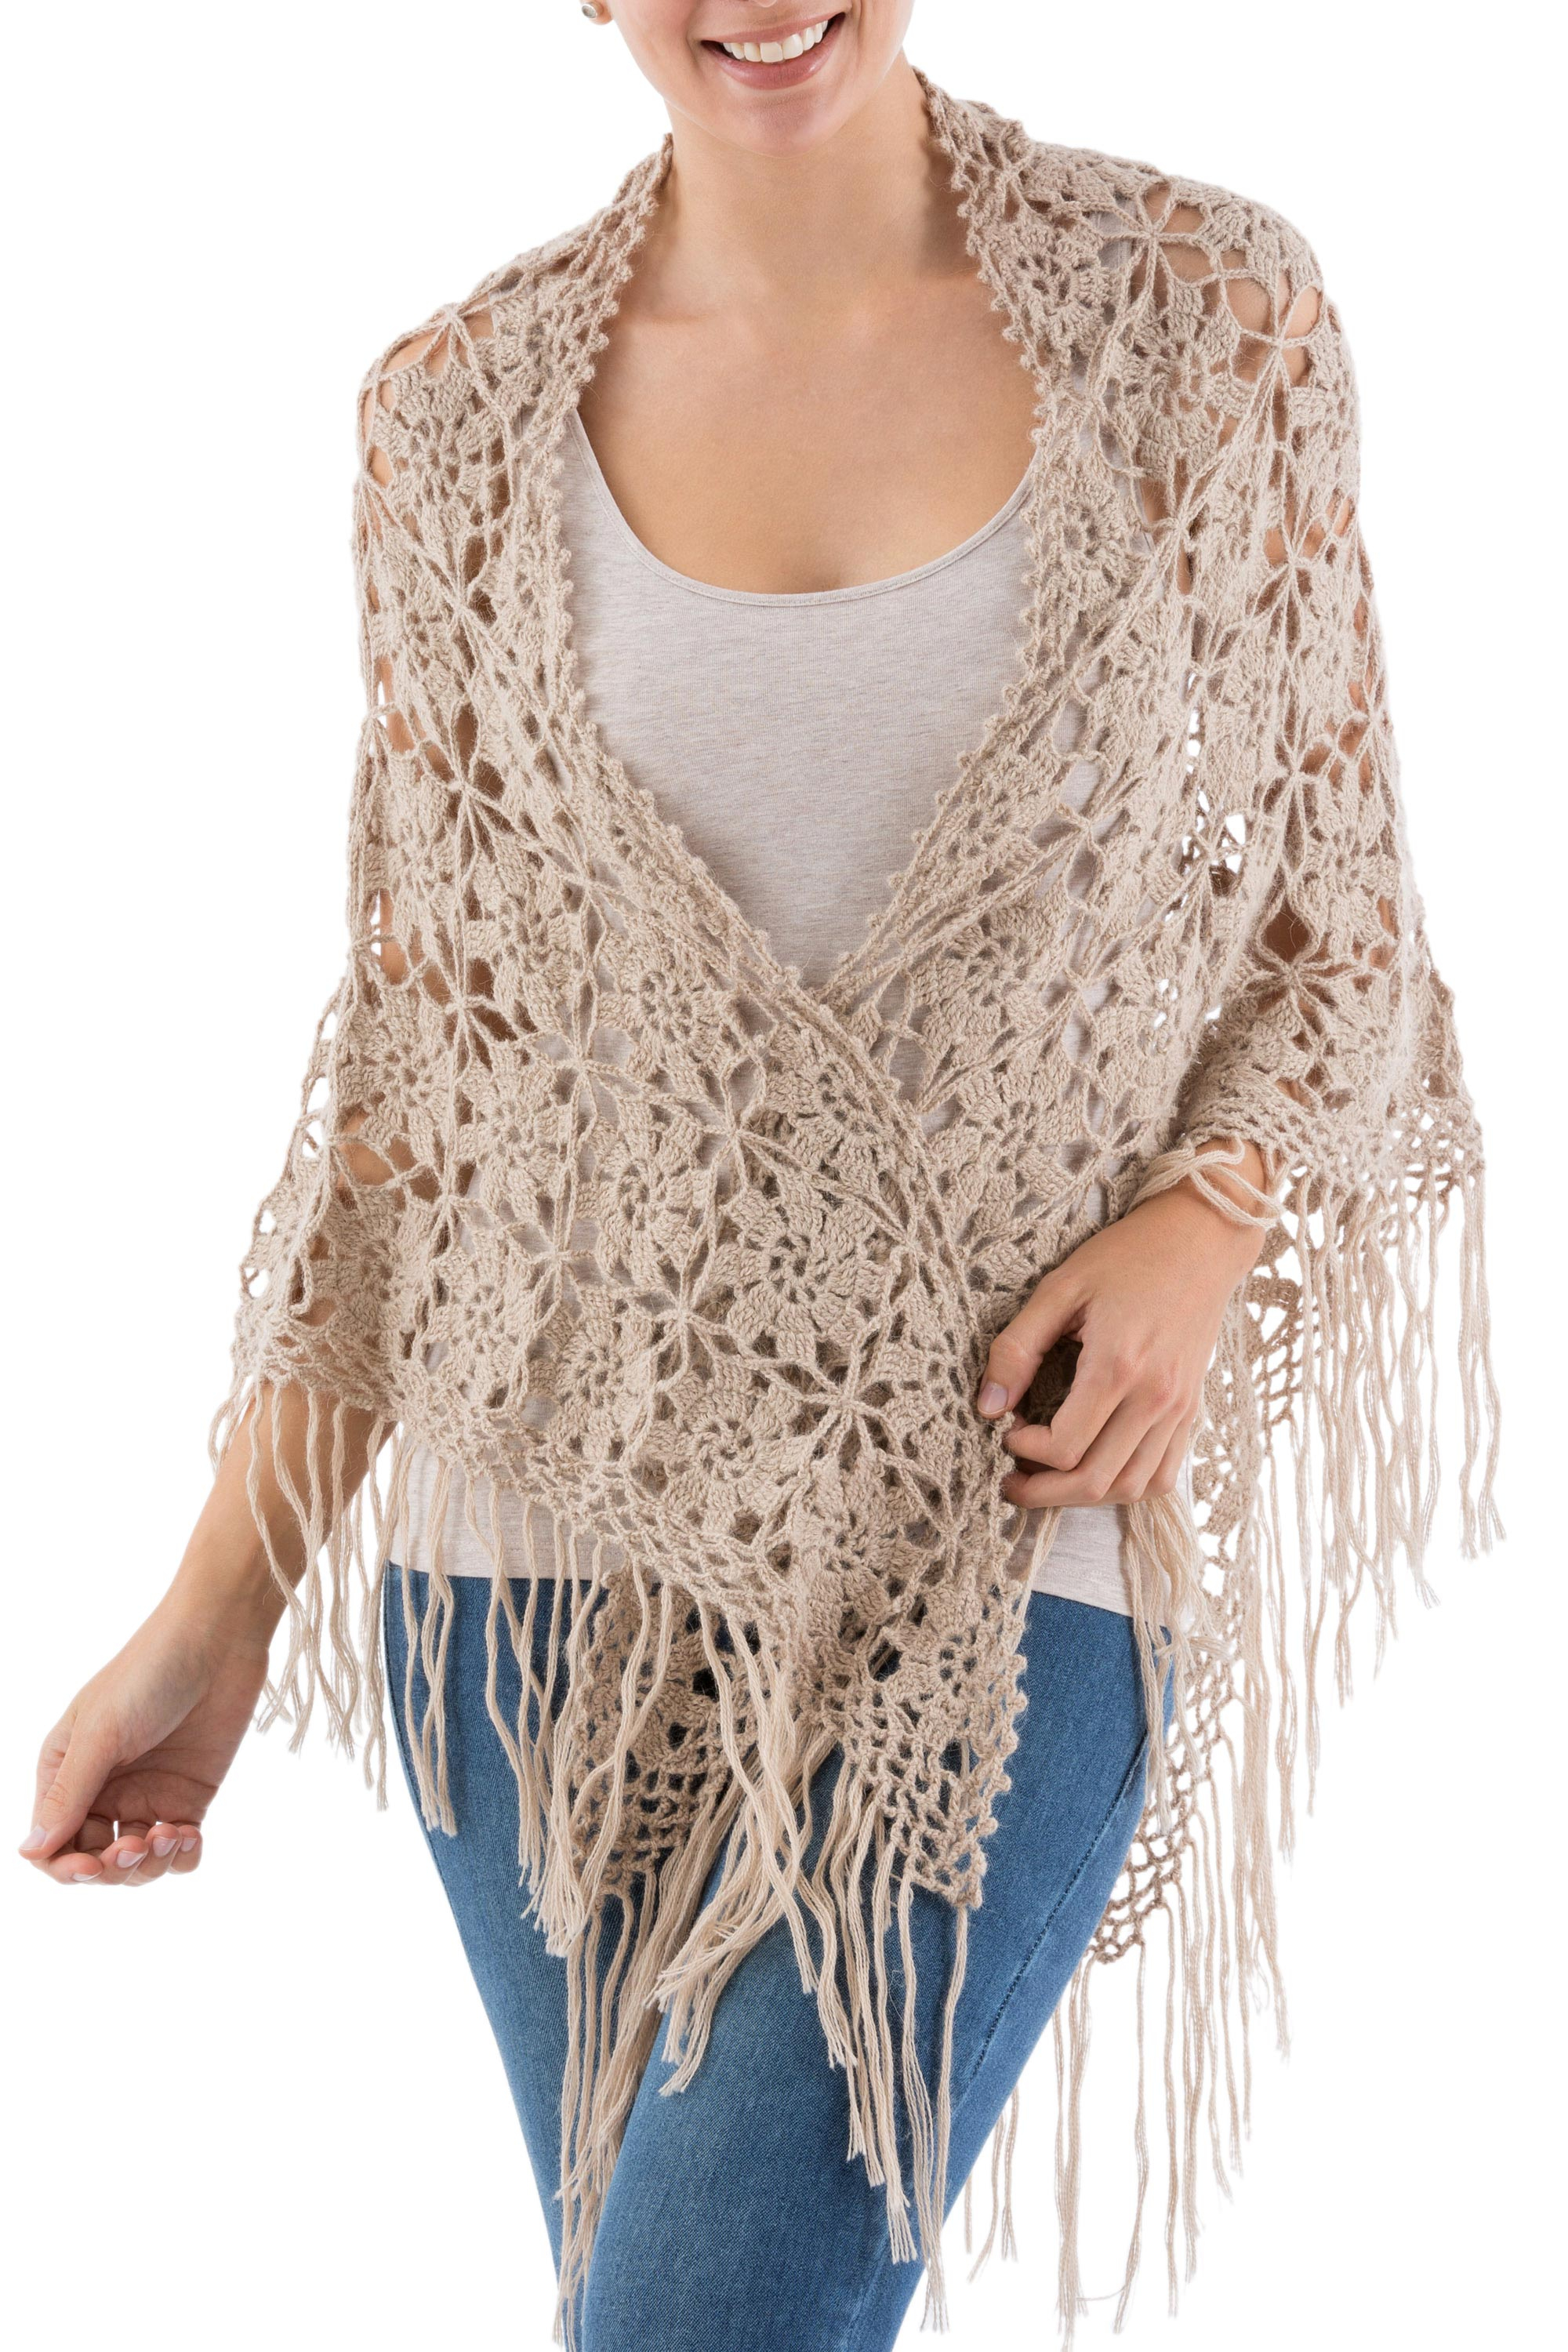 Hand Crocheted 100% Alpaca Shawl with Fringes from Peru - Andean Flower ...